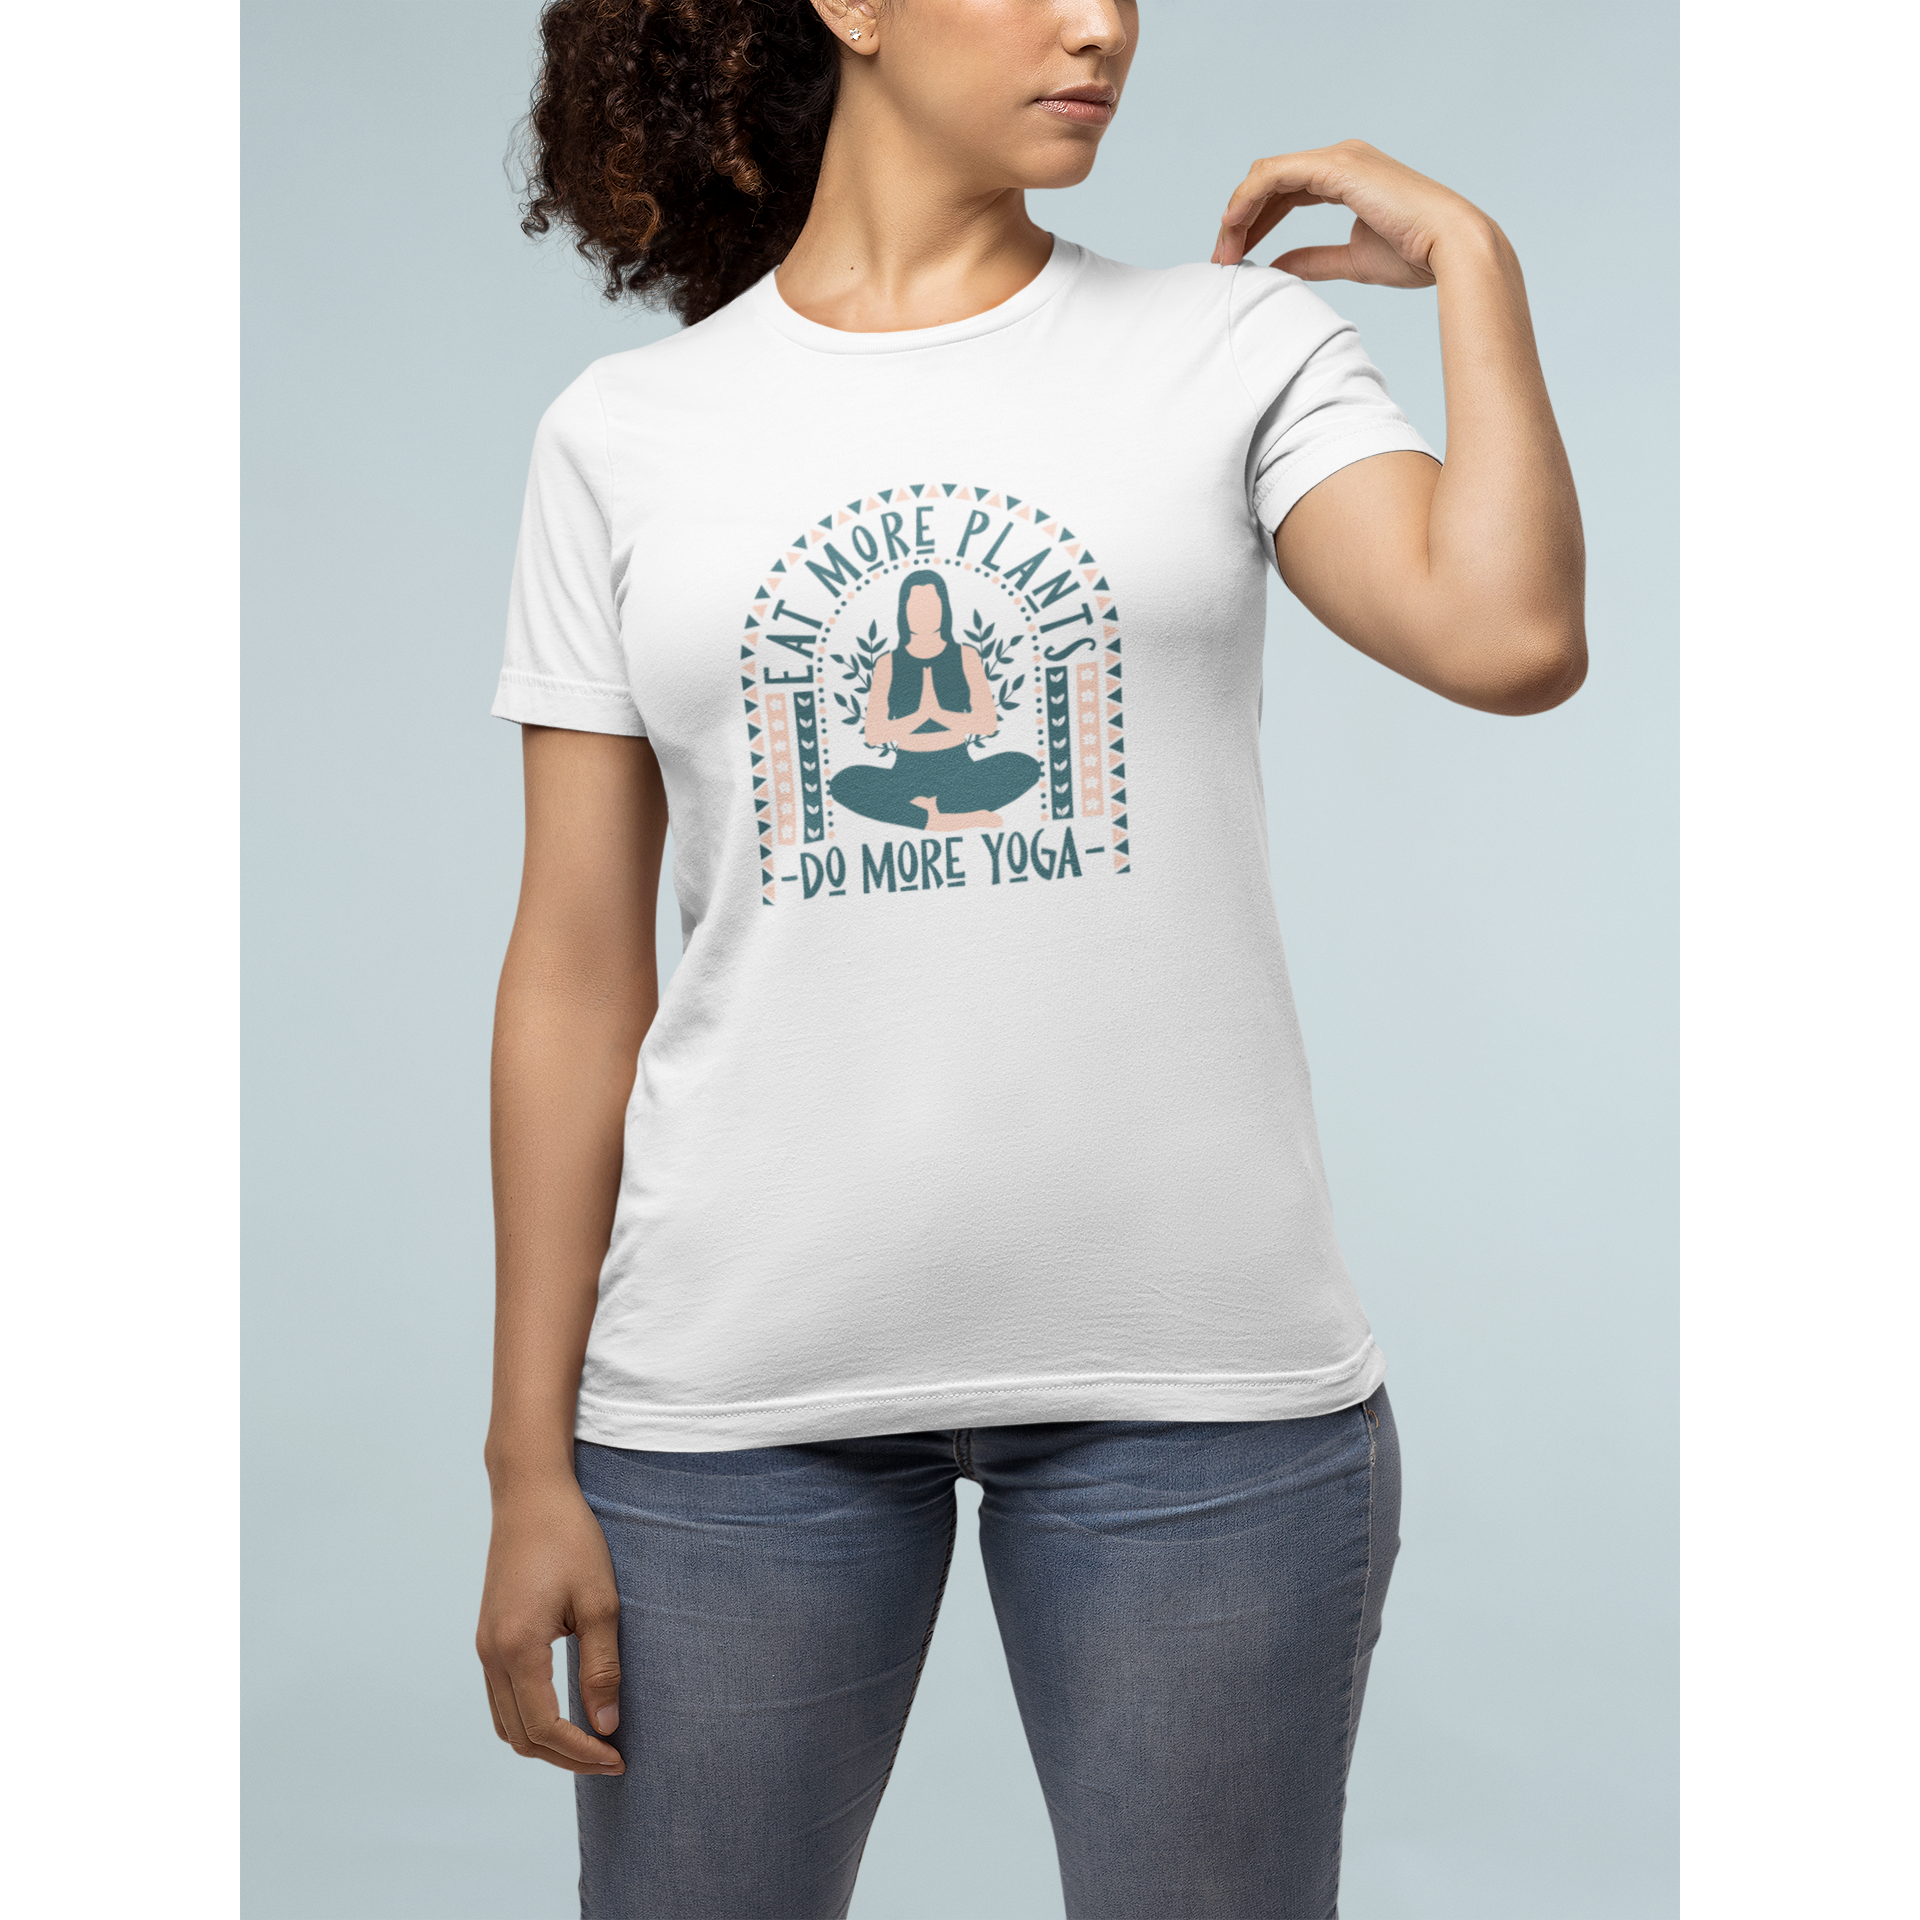 woman standing touching shoulder with "eat more plants, do more yoga" boho style design in dark grey and light muted pink, on a white premium tee, vegan workout clothes from ethical clothing brands